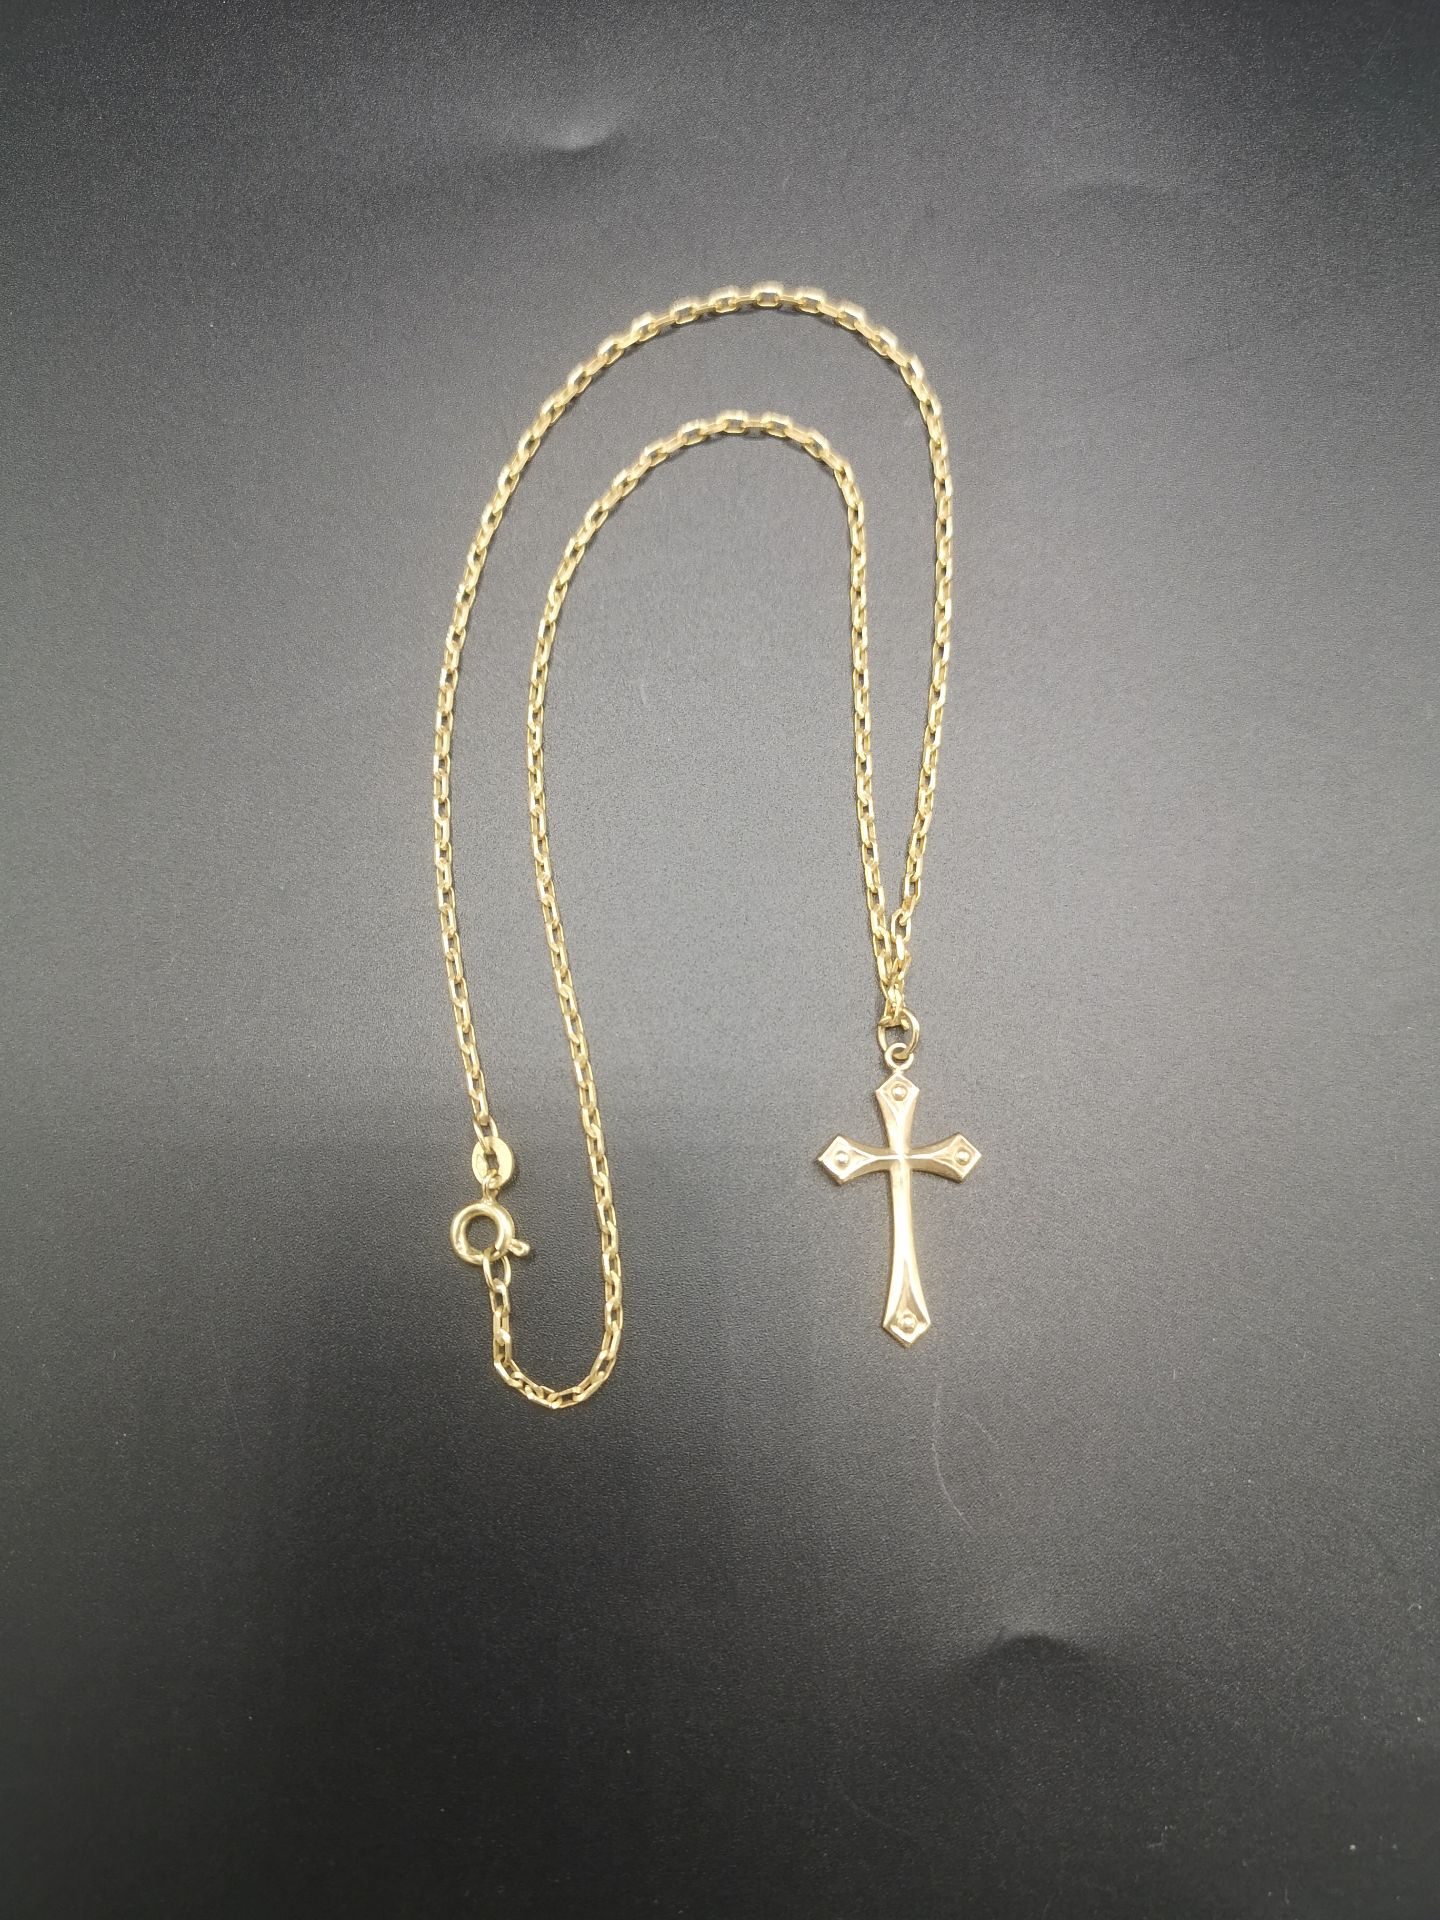 9ct gold necklace and crucifix - Image 5 of 6